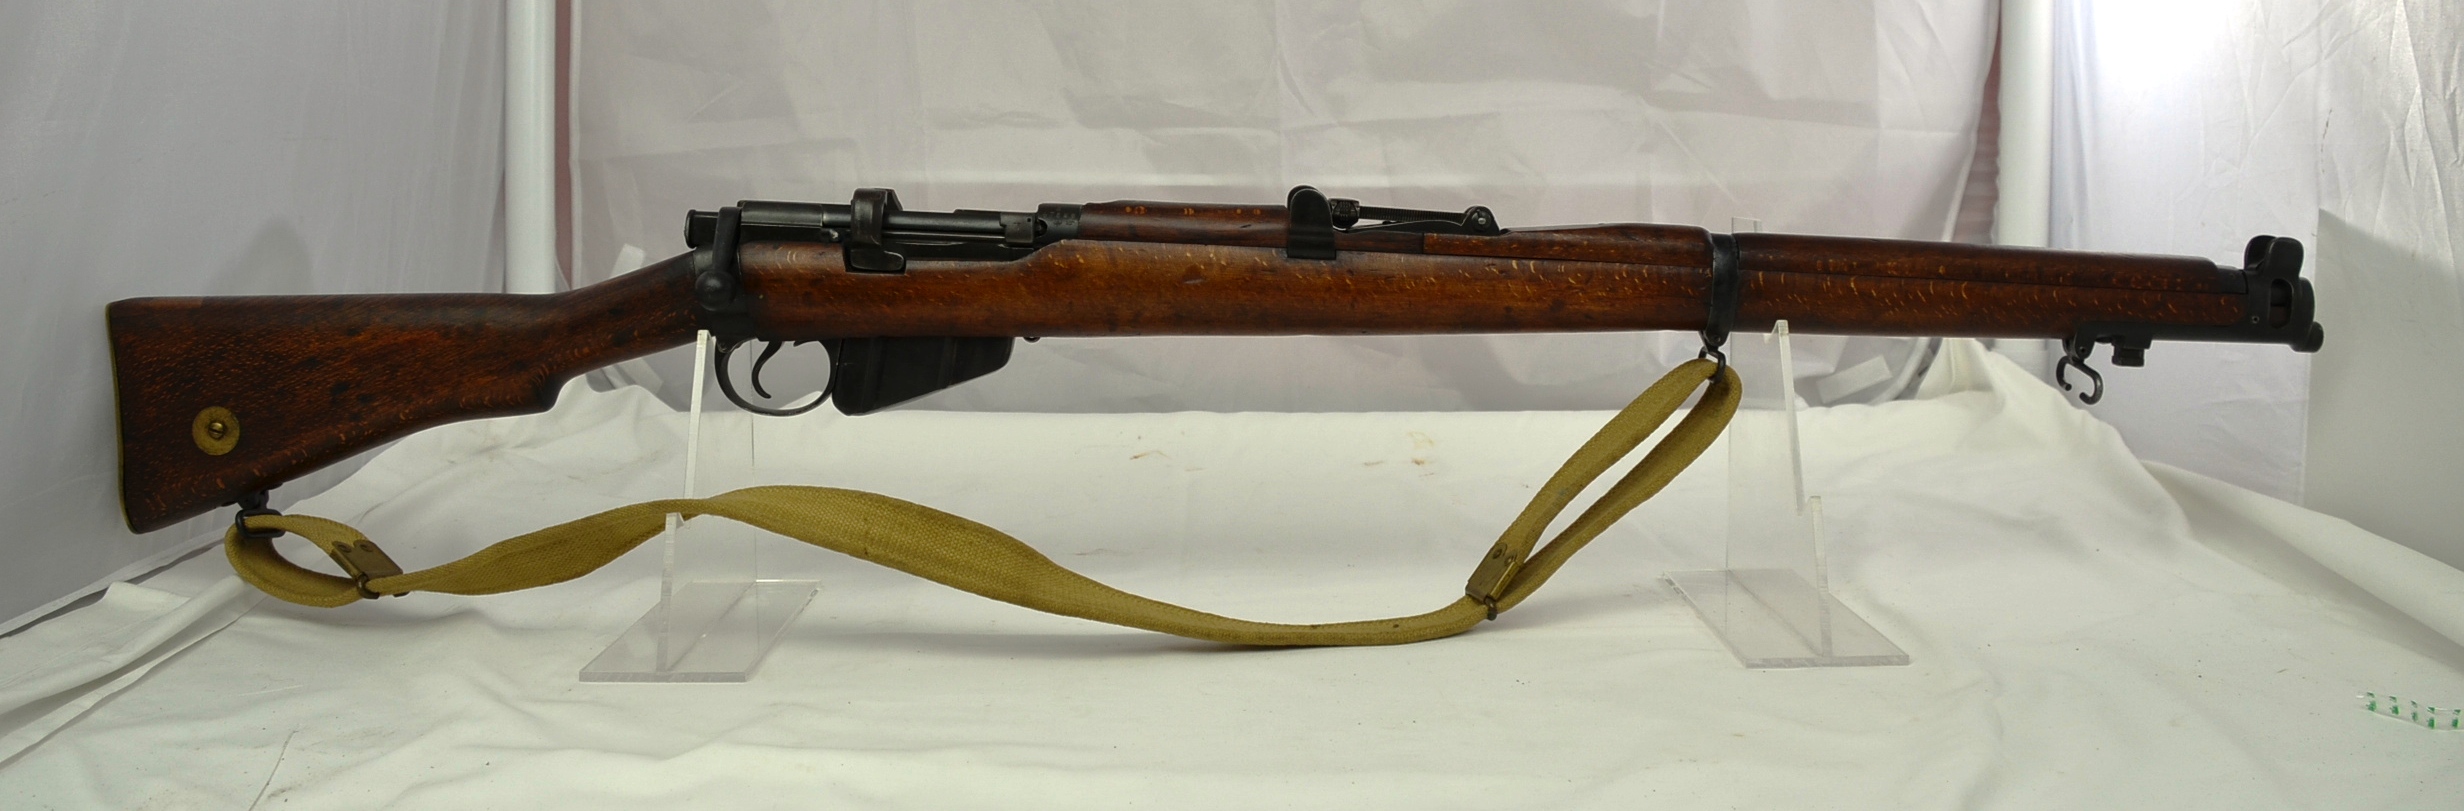 A 1918 Lee Enfield Smle Mk111 Deactivated Rifle Ww1 Uk